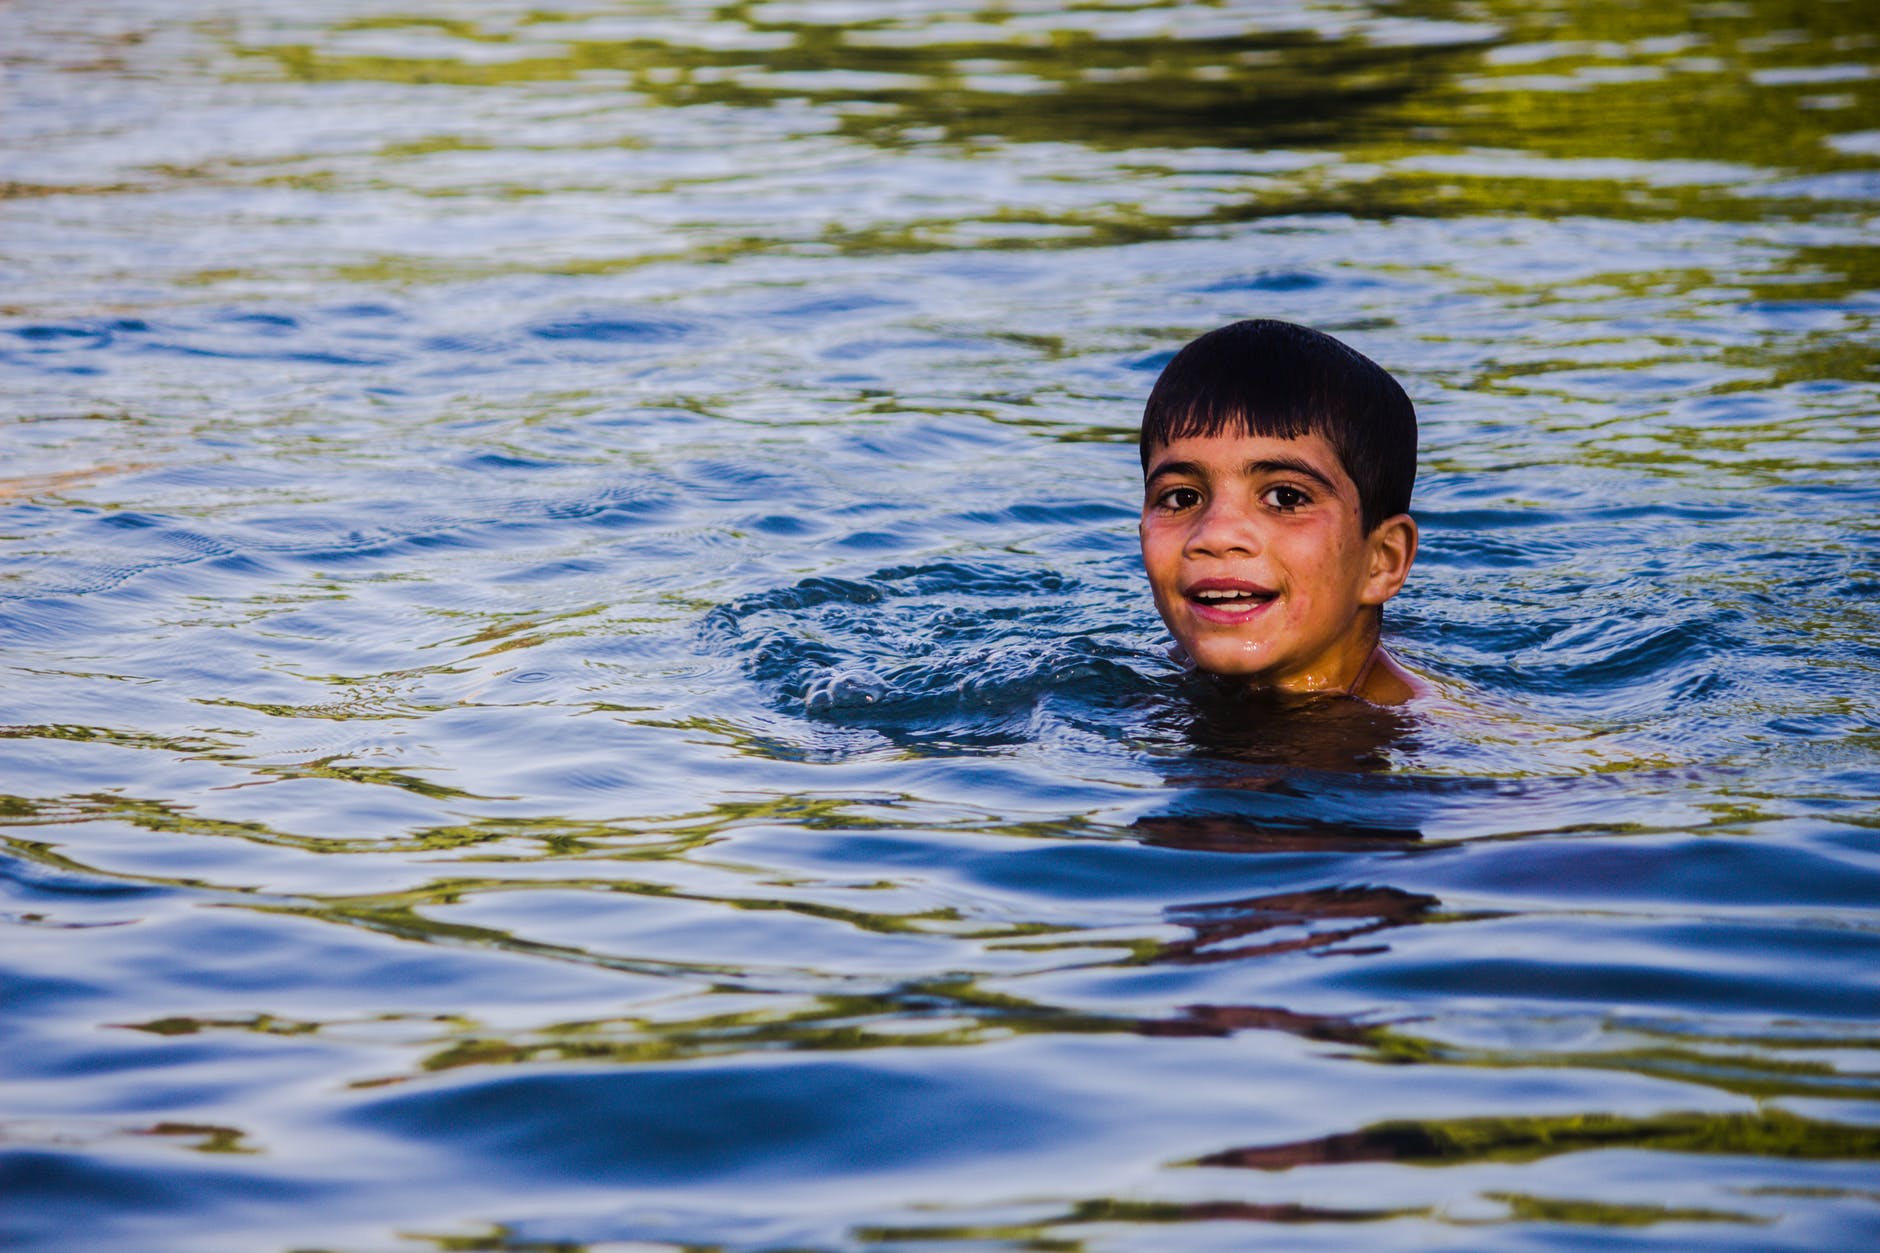 Jack assured him he could swim and get help. | Source: Pexels